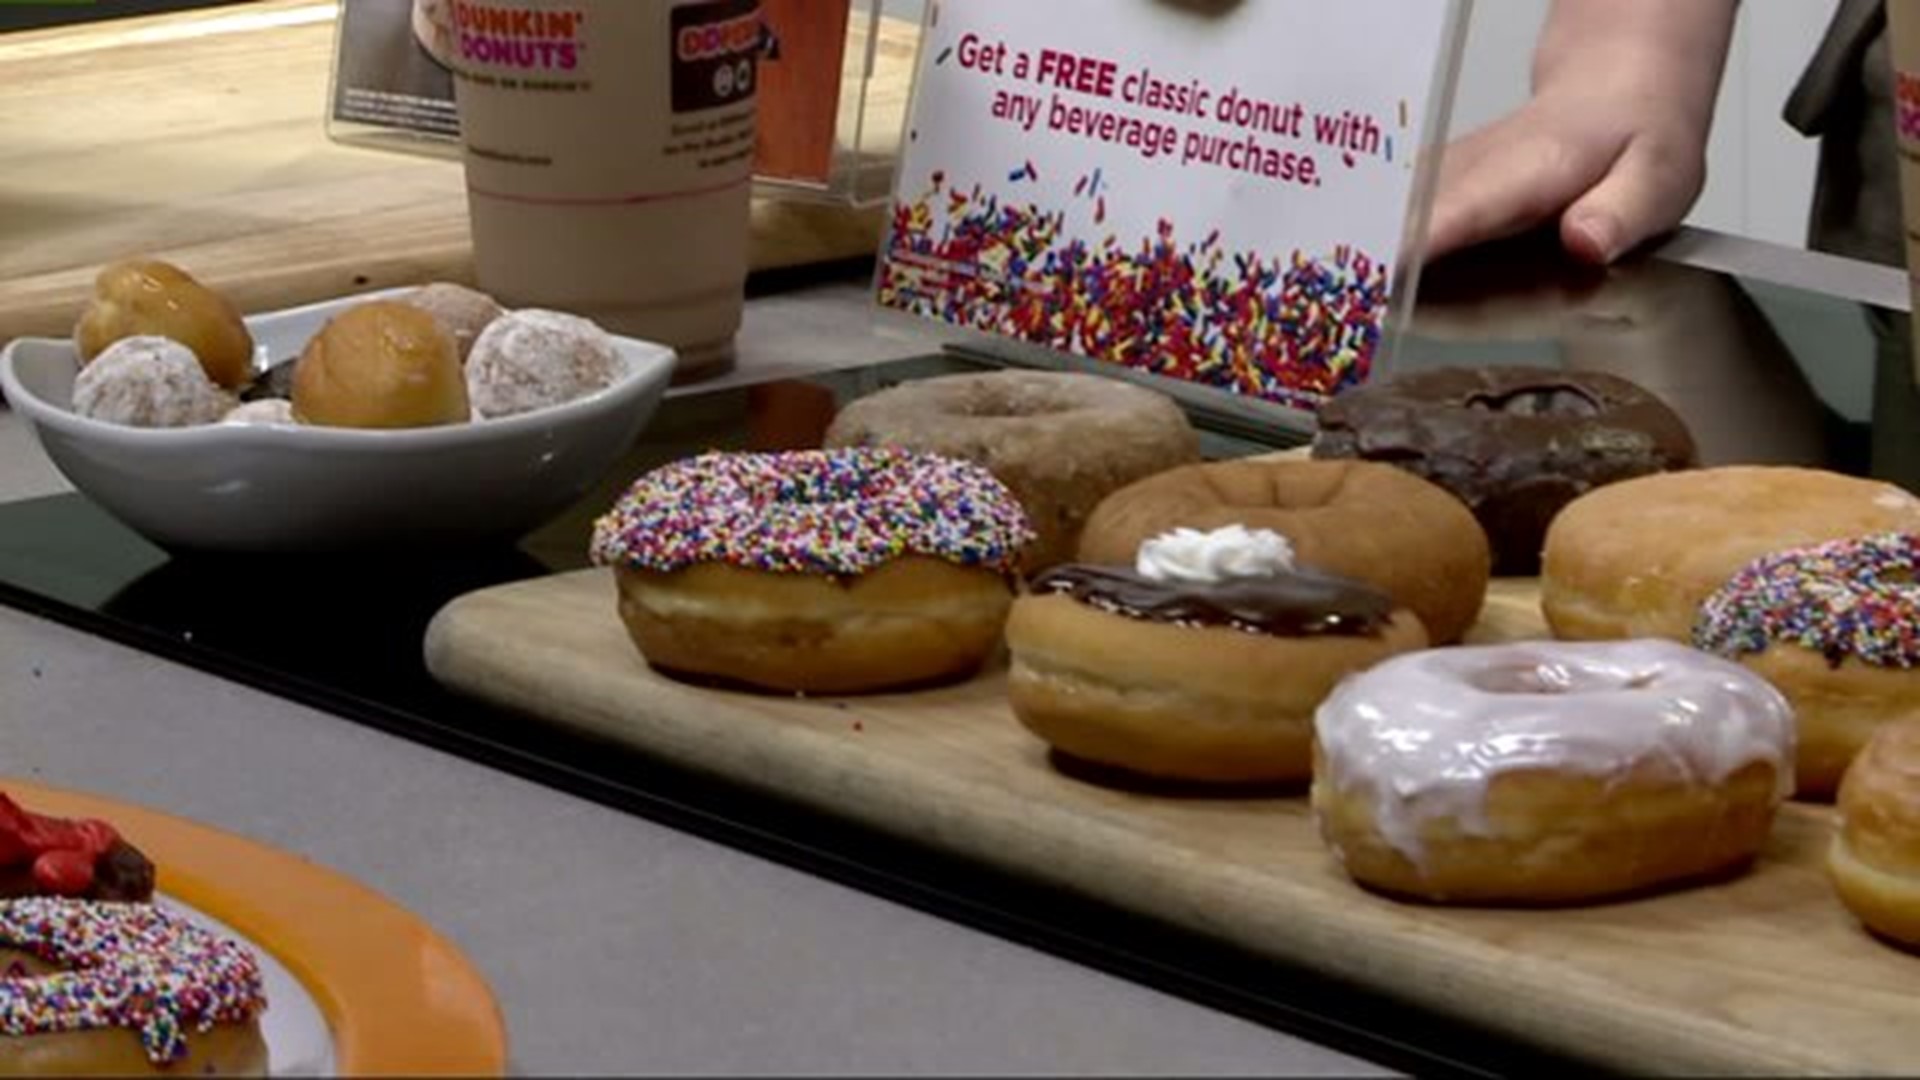 Dunkin Donuts comes to the kitchen for National Doughnut Day